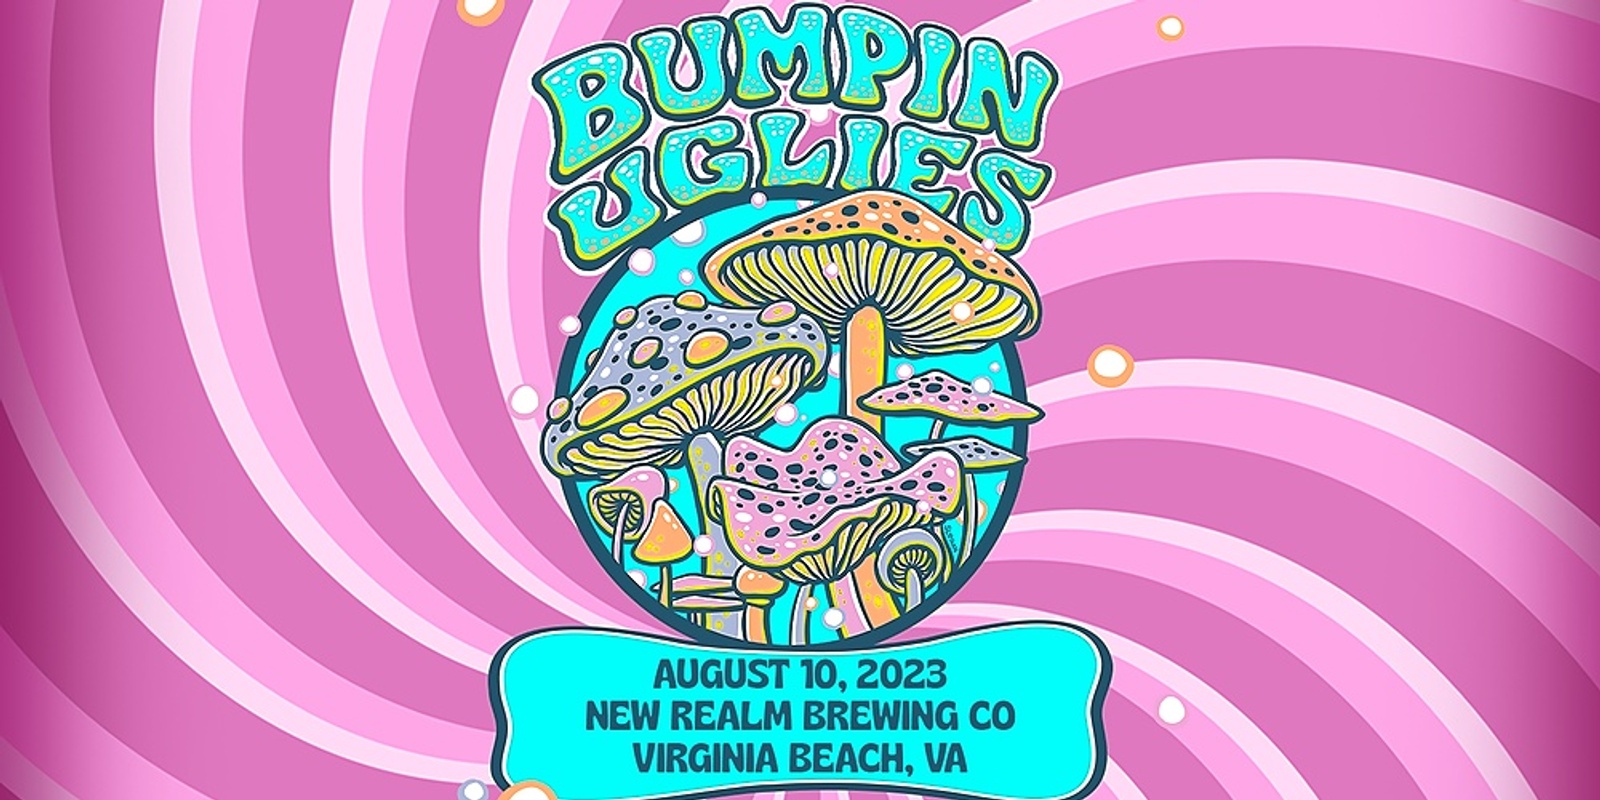 Banner image for Bumpin Uglies VIP at New Realm Brewing Co